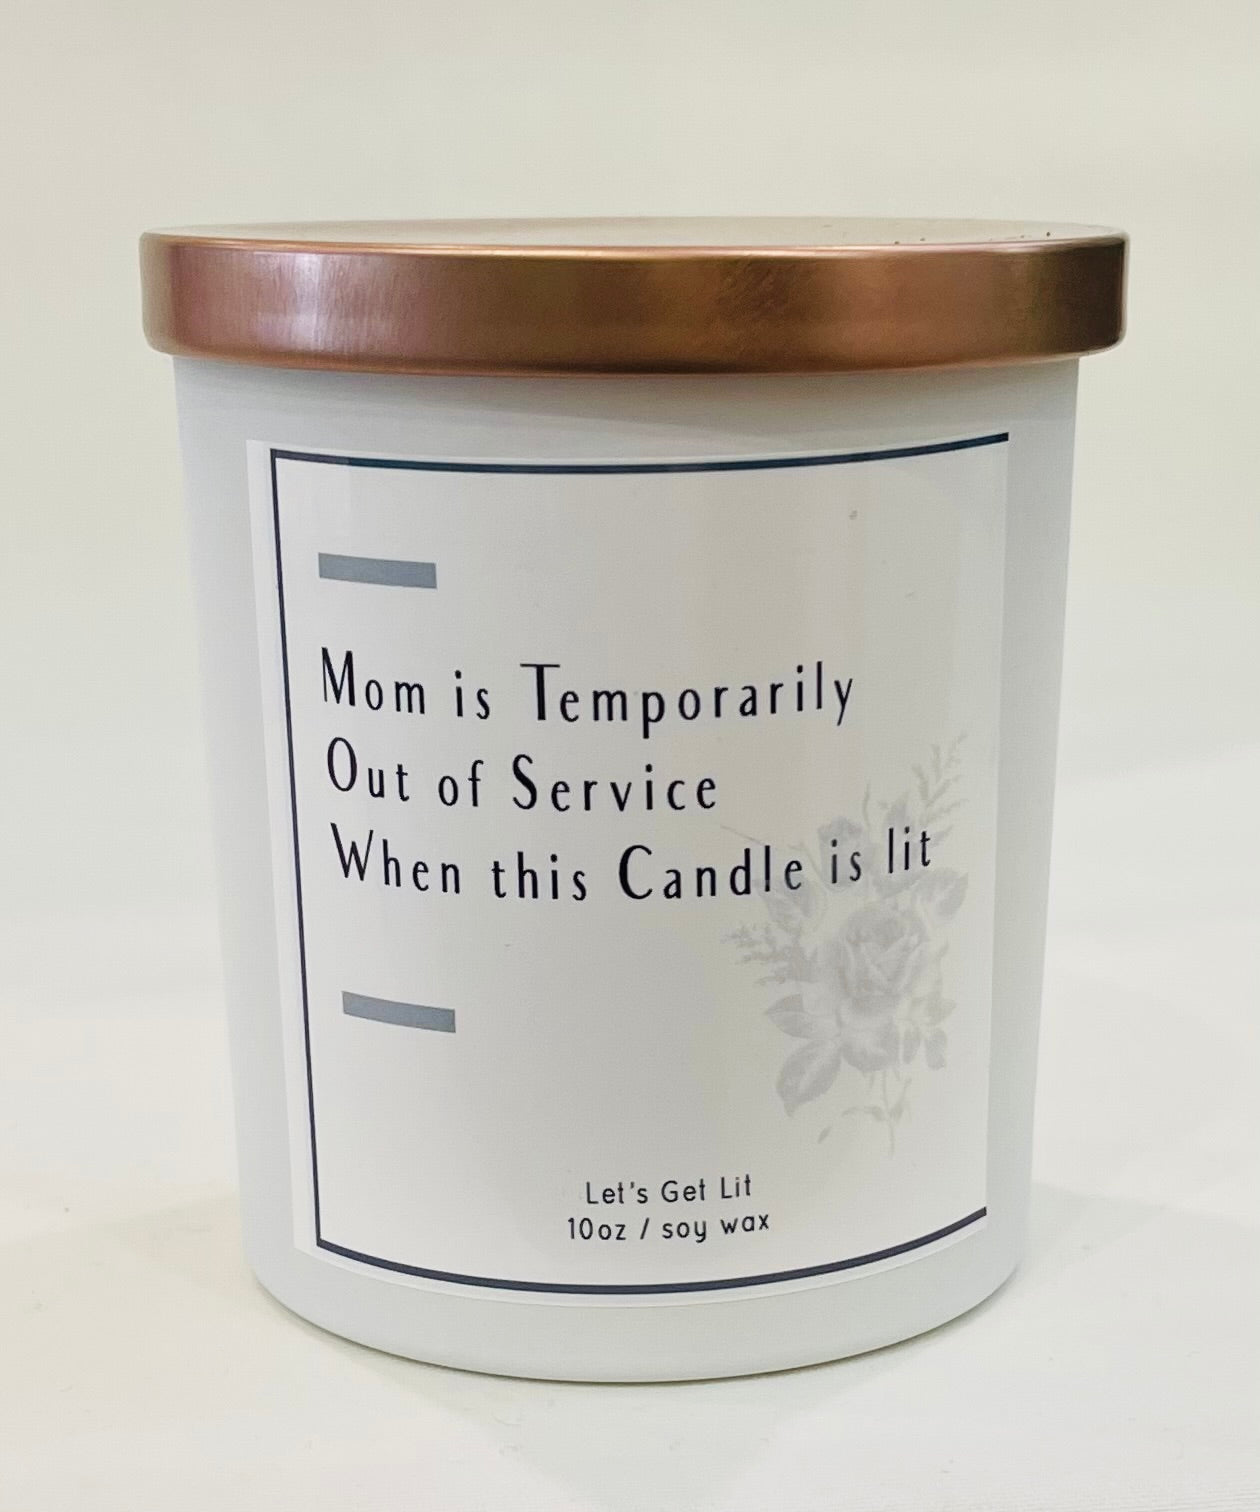 Candle, Mom Temporarily Out of Service, Soy, Margarita scent